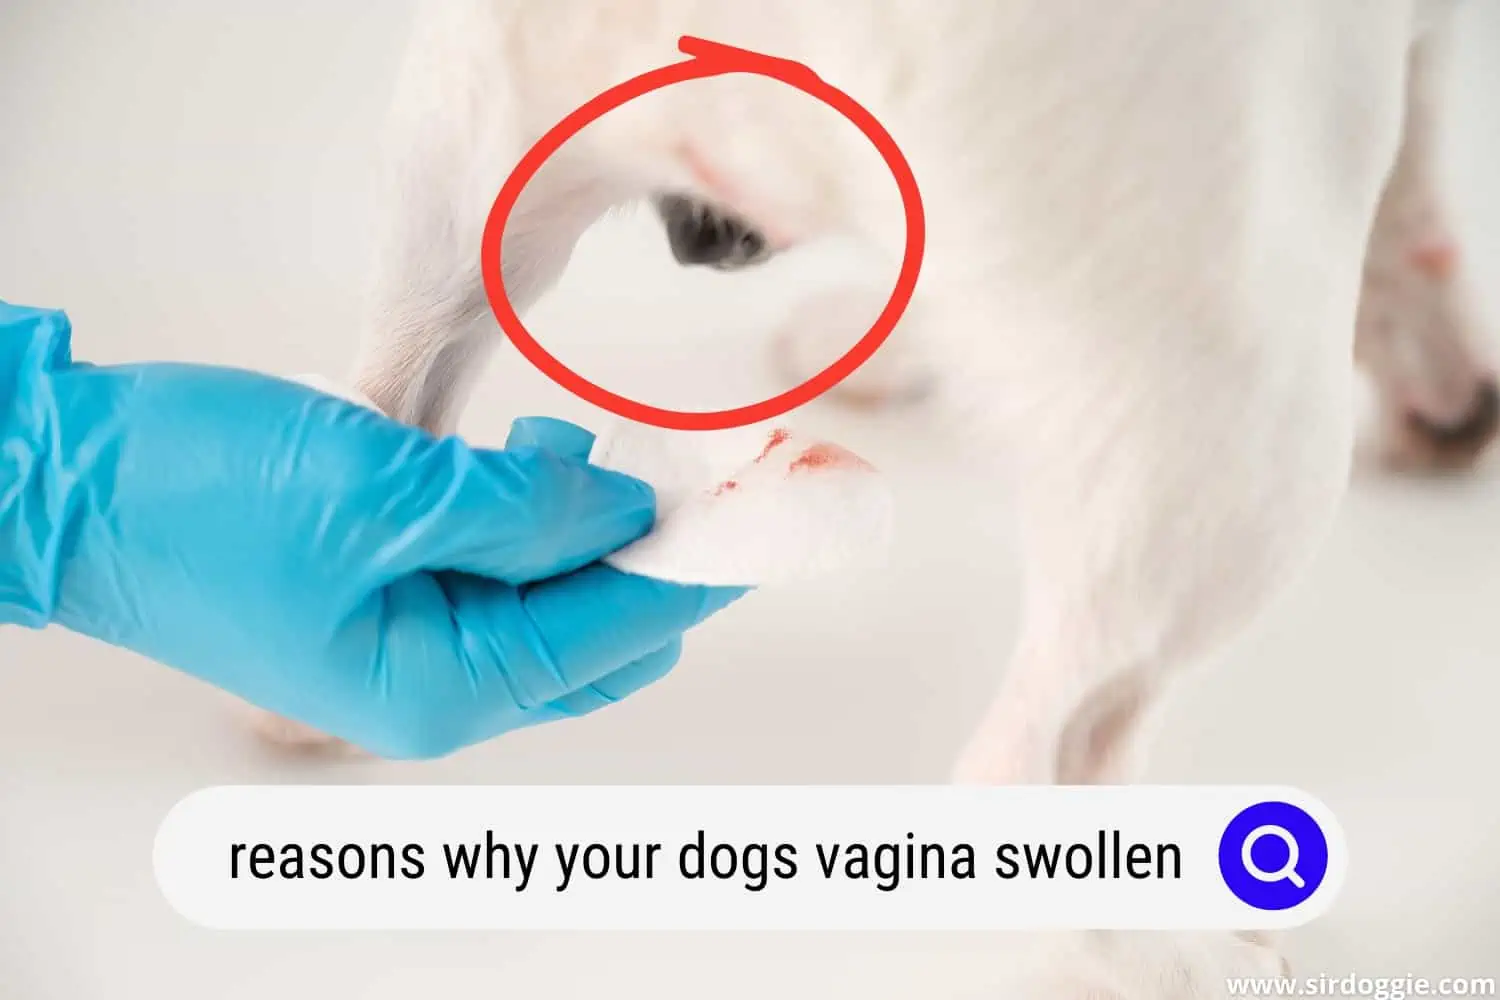 Vet taking blood from swollen vagina of a dog